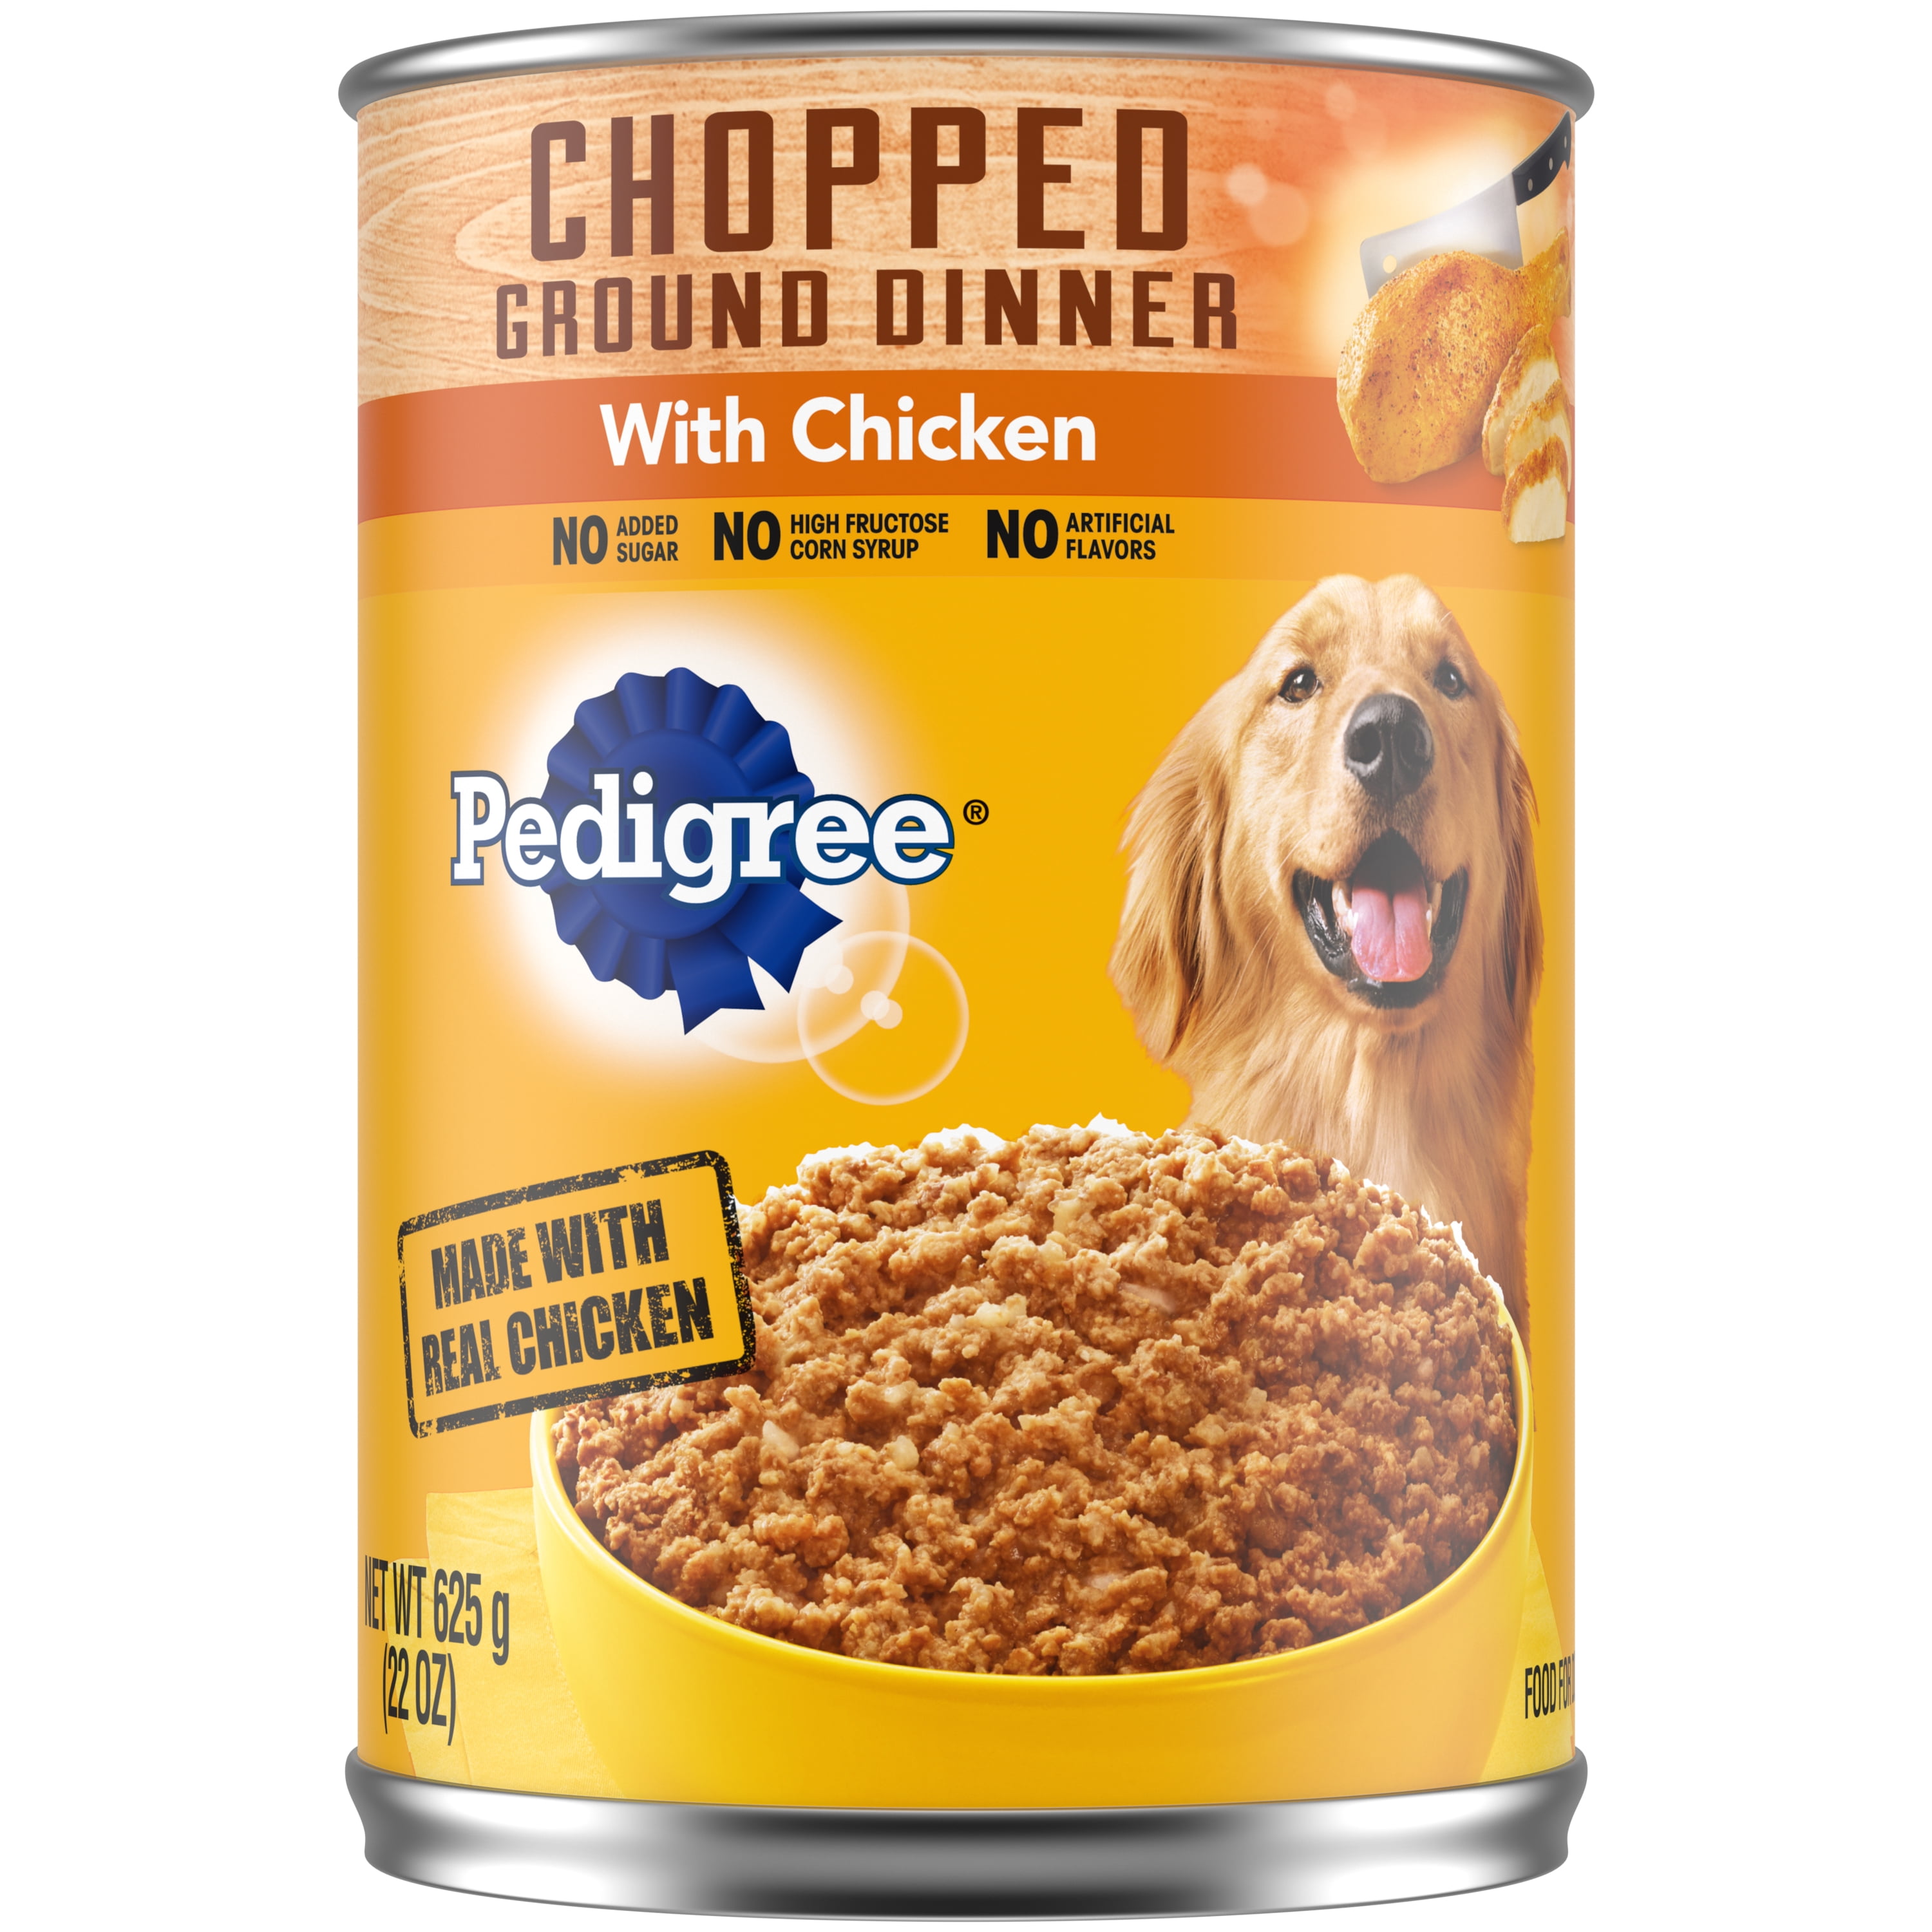 Pedigree Chopped Ground Dinner Chicken Wet Dog Food for Adult Dog, 22 oz. Can